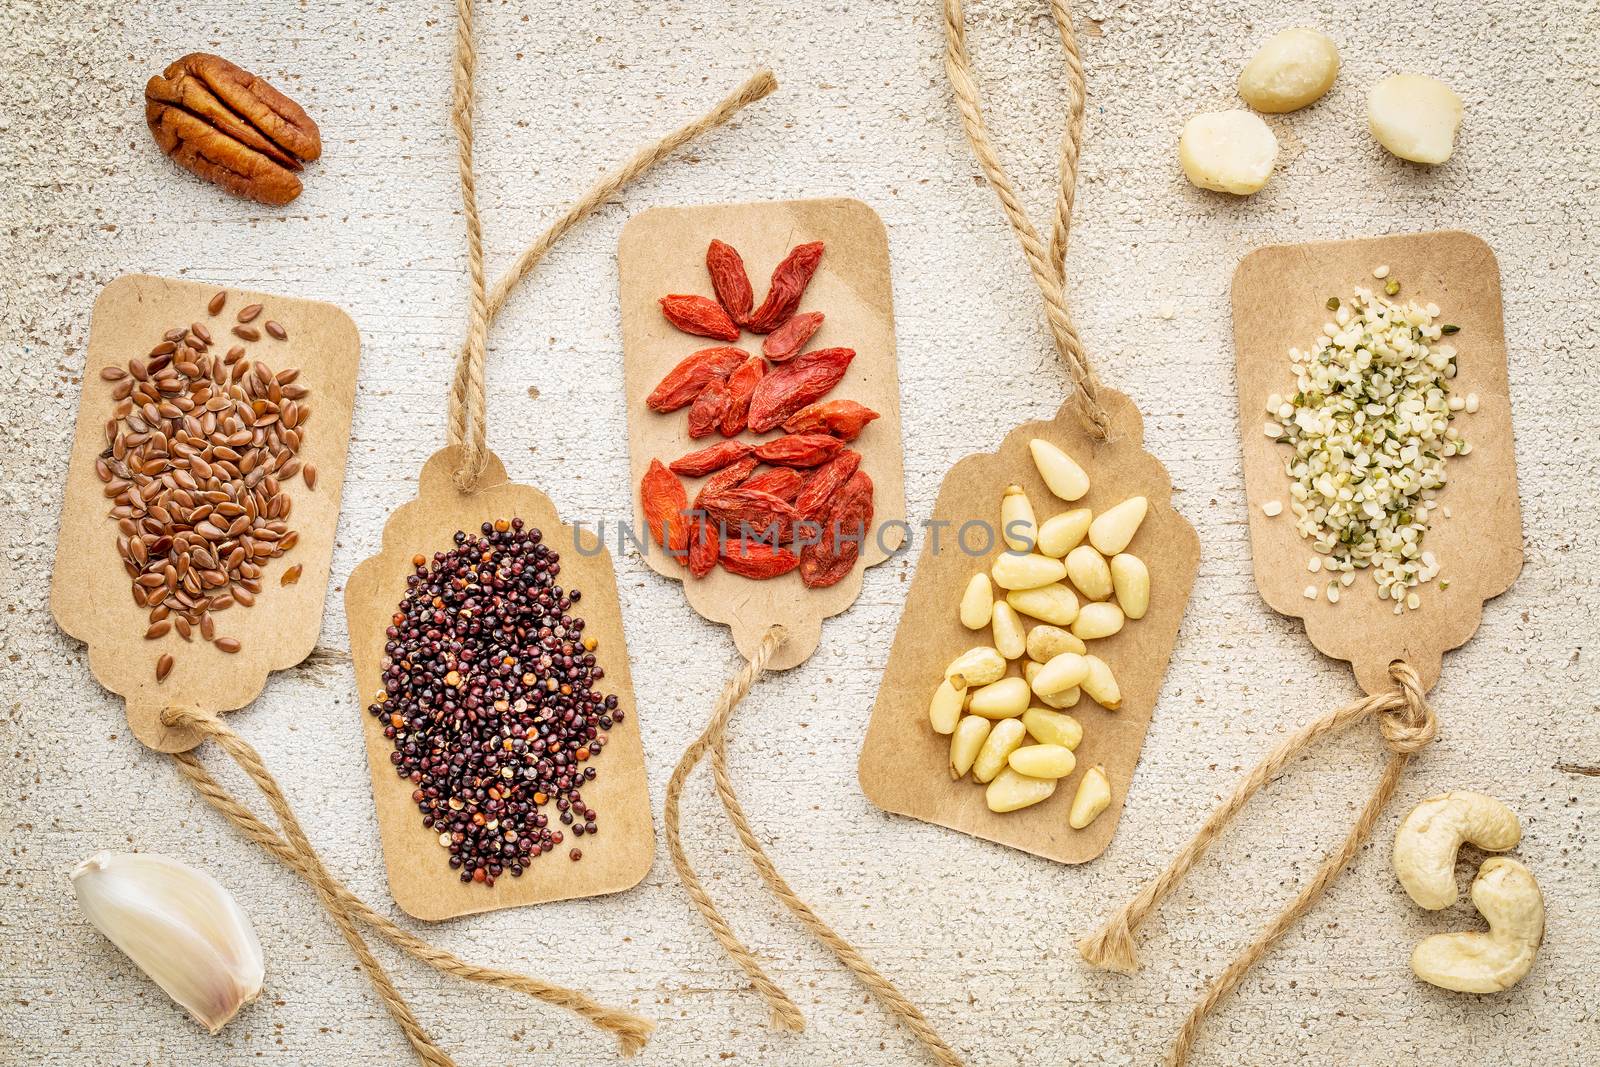 berries, nuts, grains and seeds - superfood abstract by PixelsAway